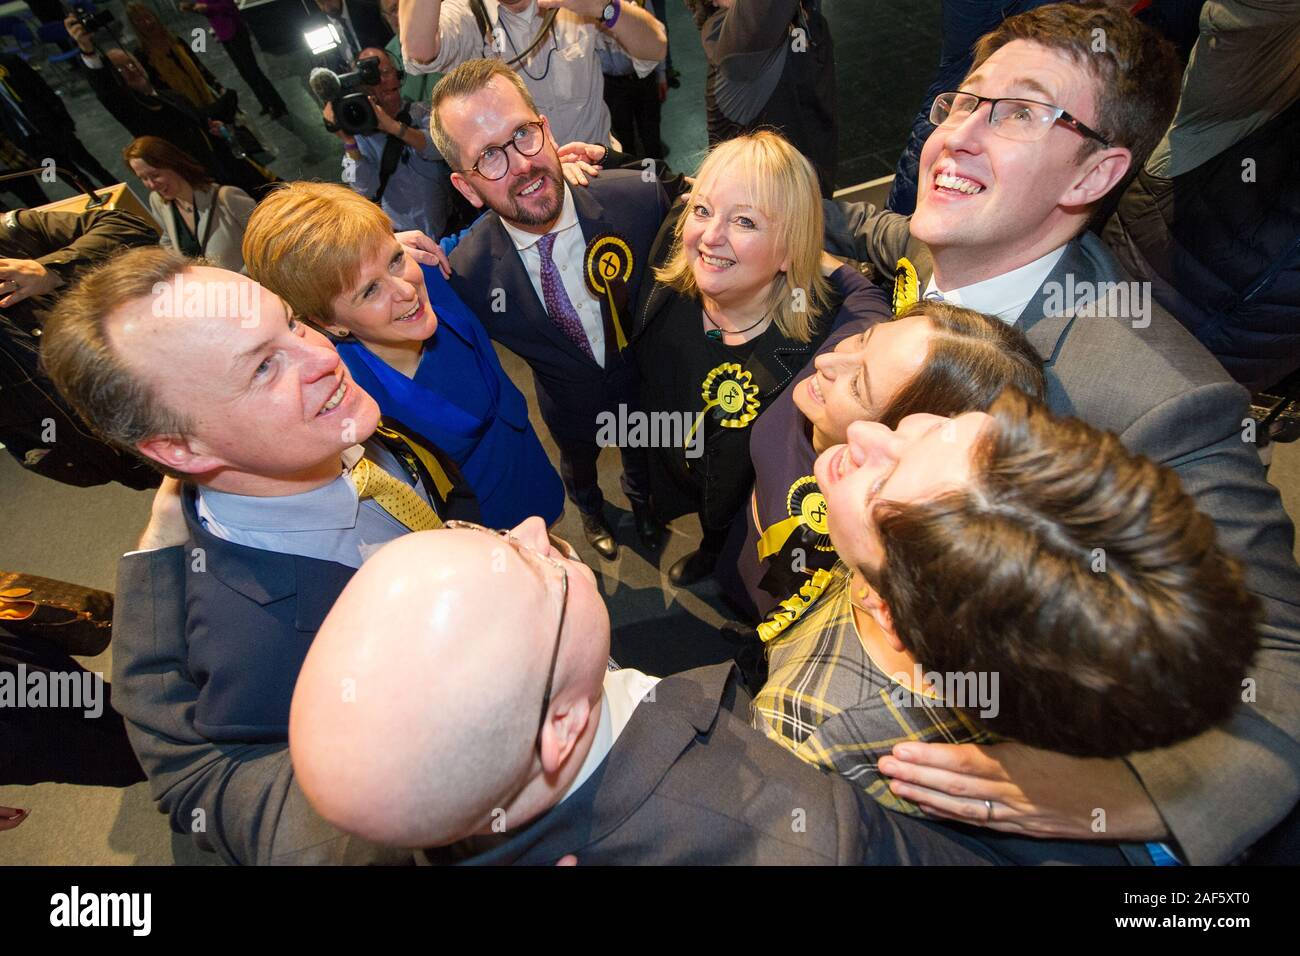 Glasgow, UK. 13th Dec, 2019. Pictured: (in blue) Nicola Sturgeon MSP - First Minister of Scotland and Leader of the Scottish National Party (SNP); standing along with hre winning candidates. Scenes from the vote count at the Scottish Exhibition and Conference Centre (SECC). The poles have now closed at 10pm and the vote count is now underway for the UK Parliamentary General Election 2019. This is the first time in almost 100 years that a general election has taken place in December. Credit: Colin Fisher/Alamy Live News Stock Photo